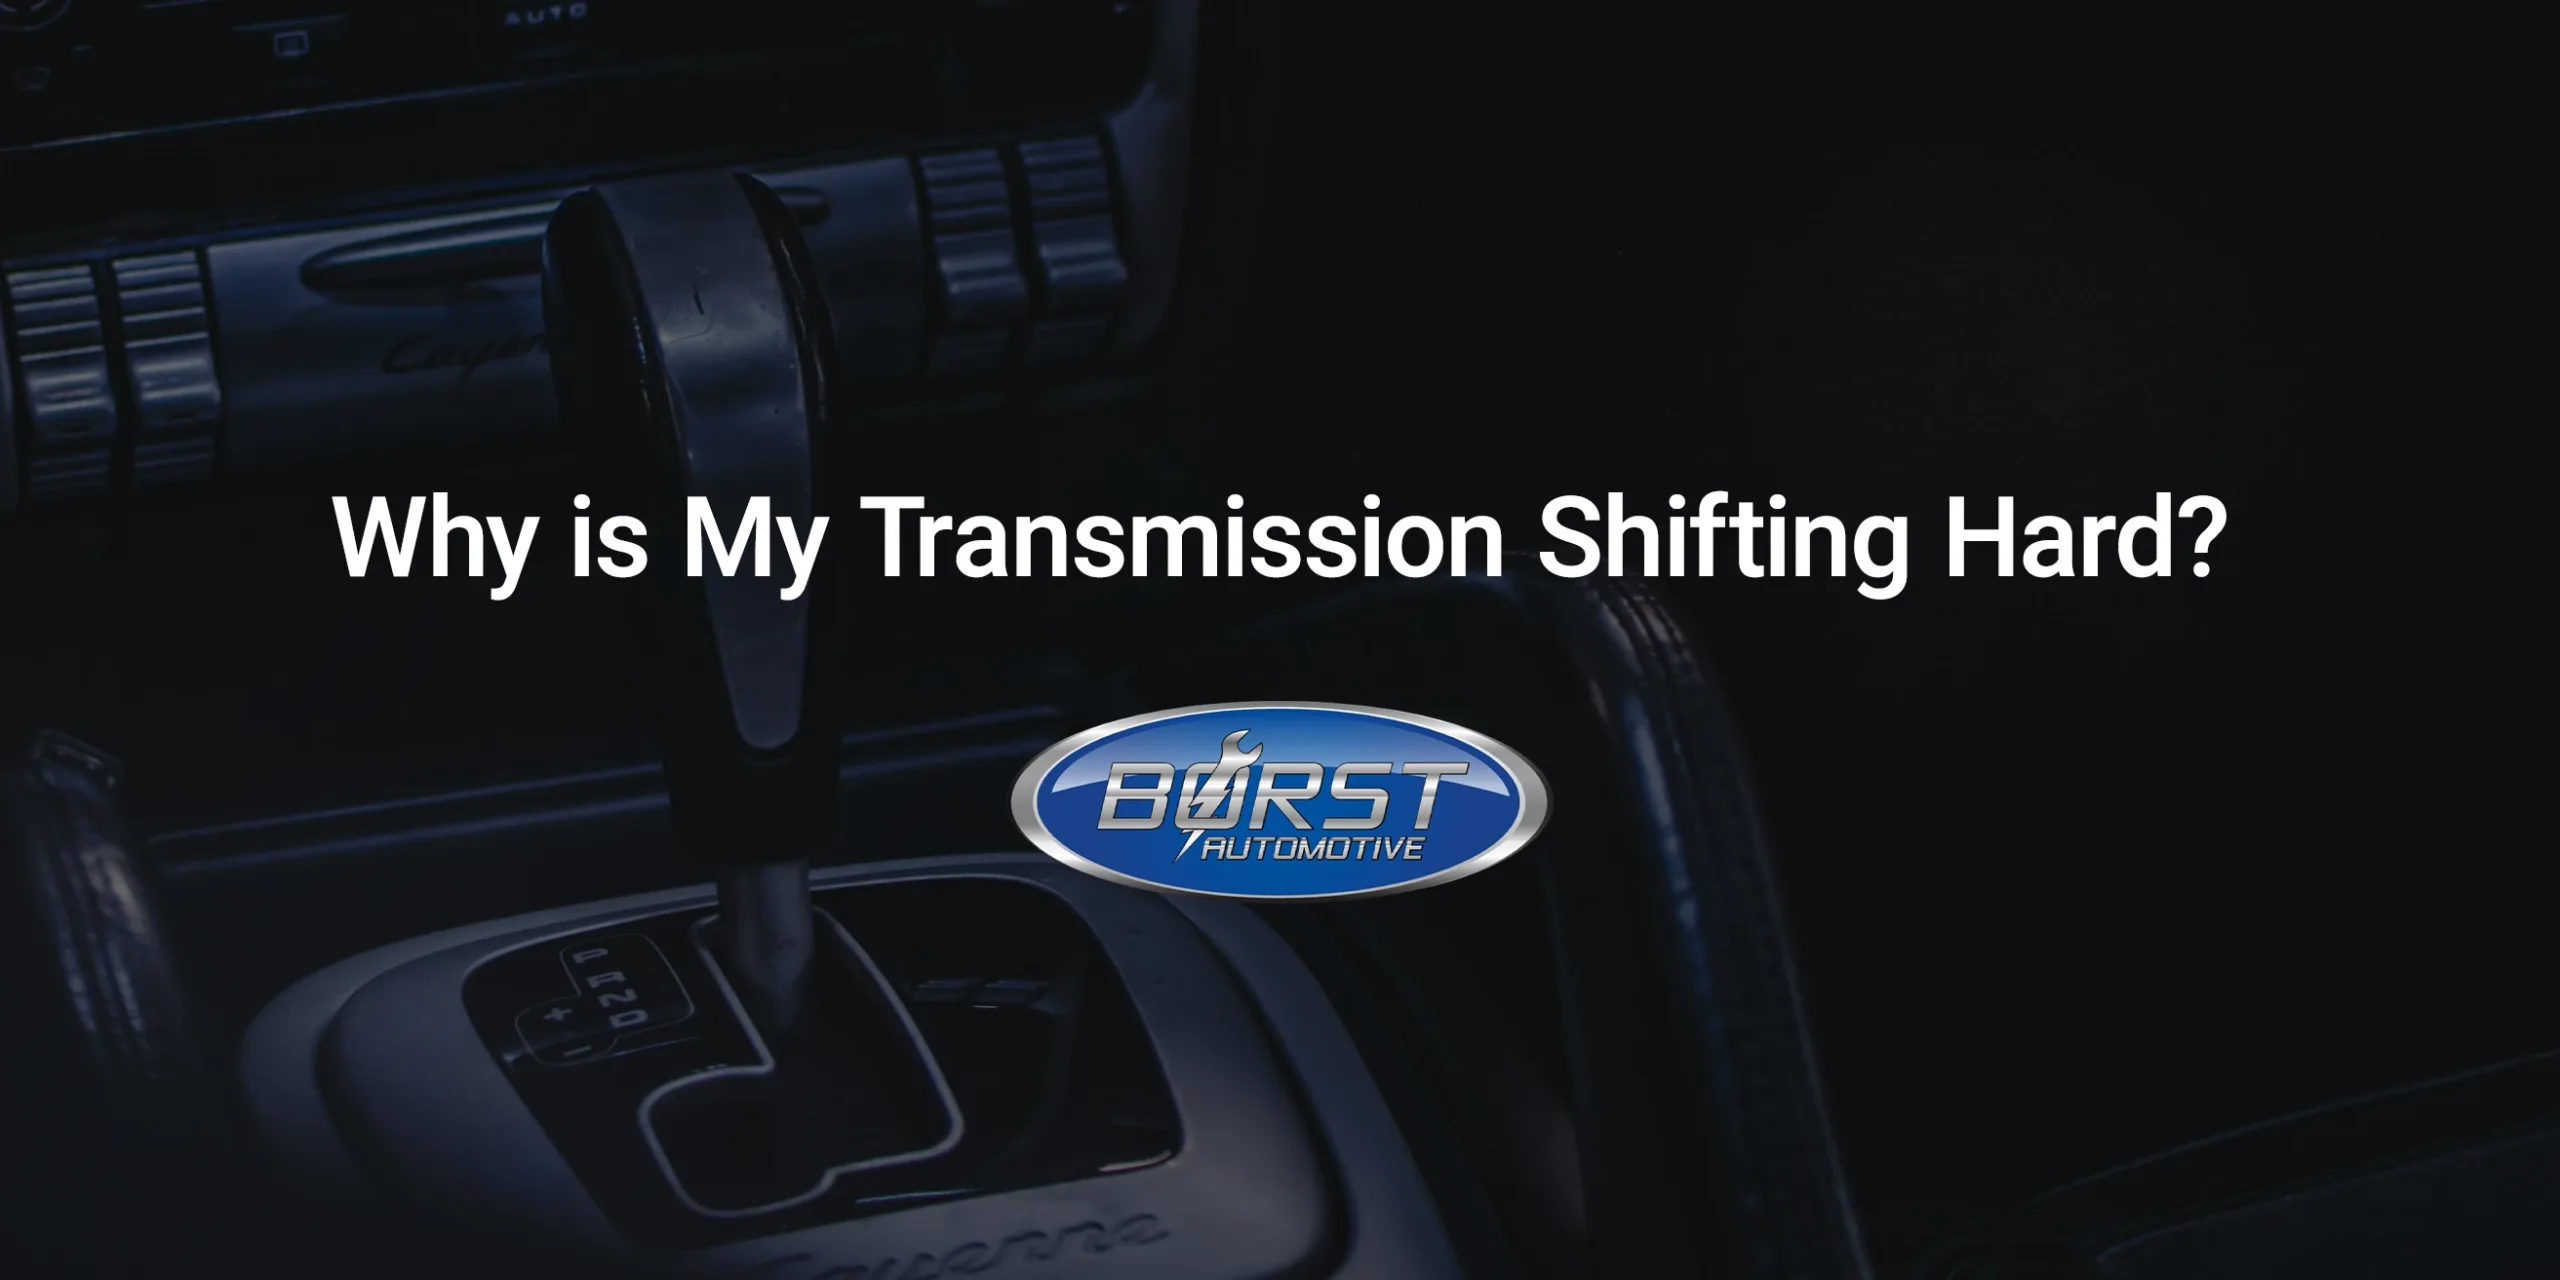 Why is My Transmission Shifting Hard?